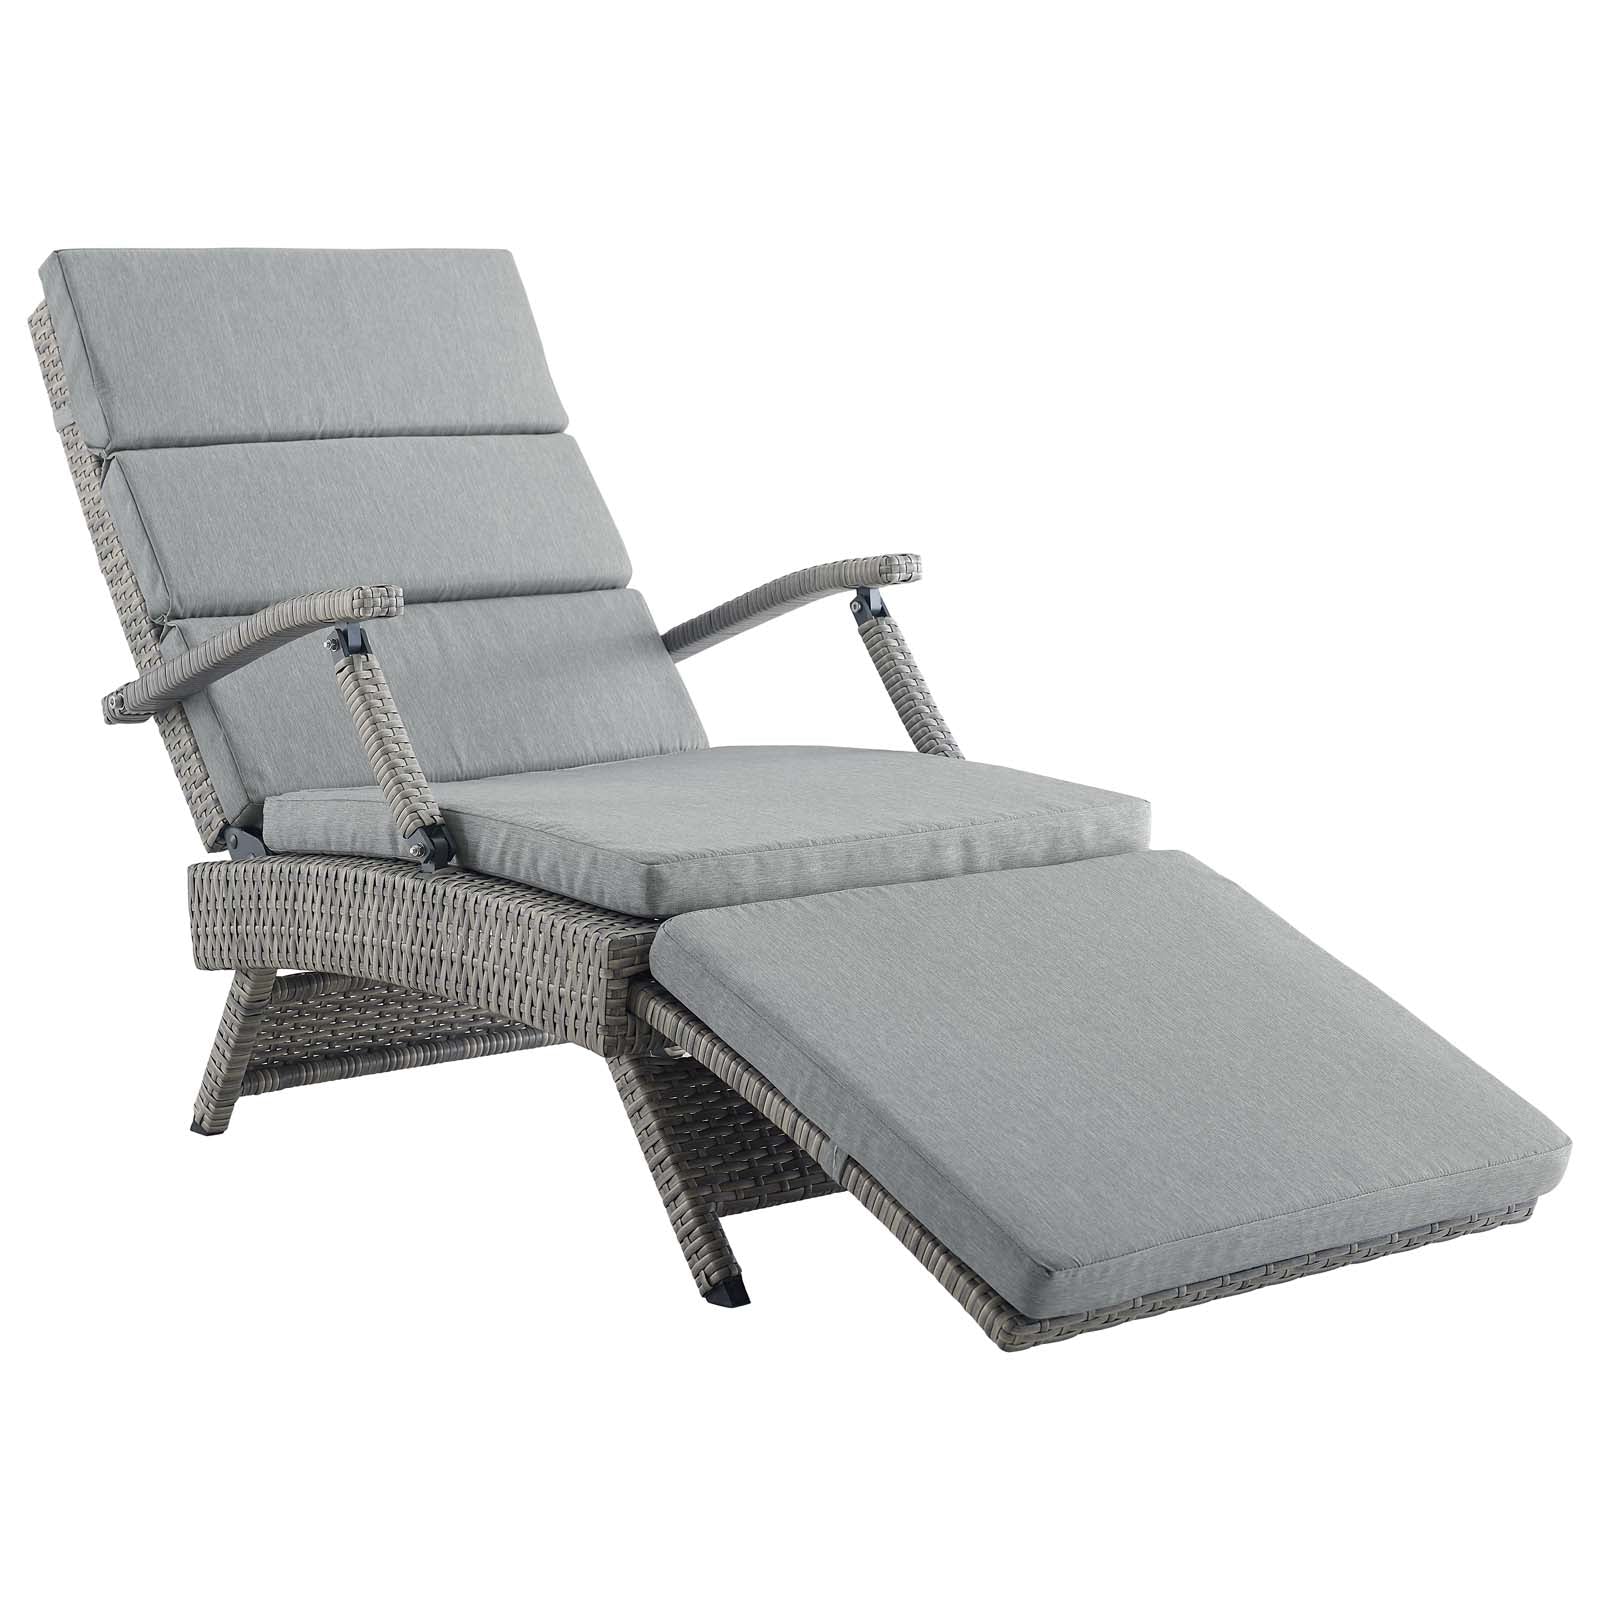 Modway Outdoor Loungers - Envisage Chaise Outdoor Patio Wicker Rattan Lounge Chair Light Gray